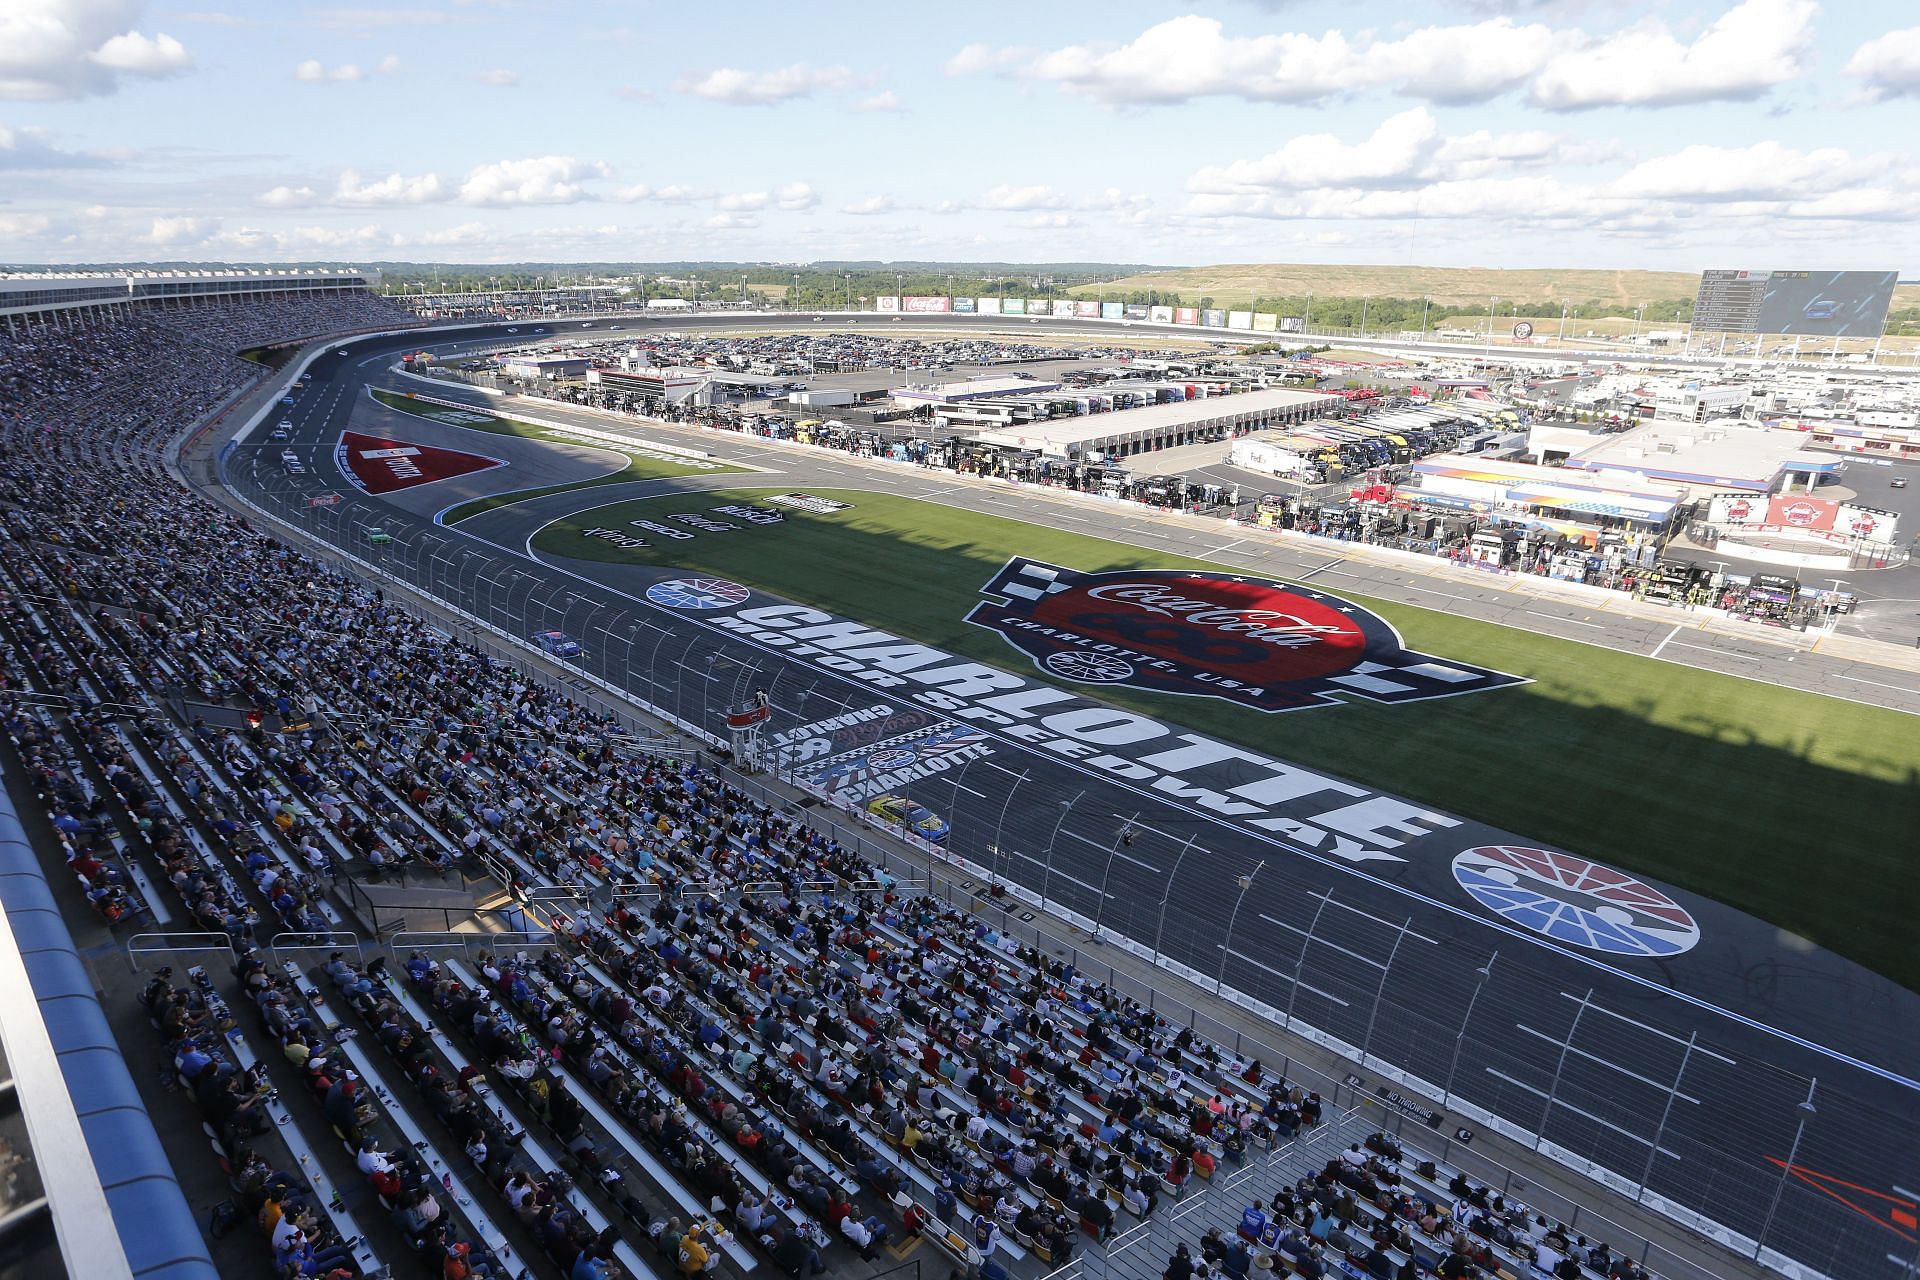 A general view of cars on track during the NASCAR Cup Series Coca-Cola 600 at Charlotte Motor Speedway